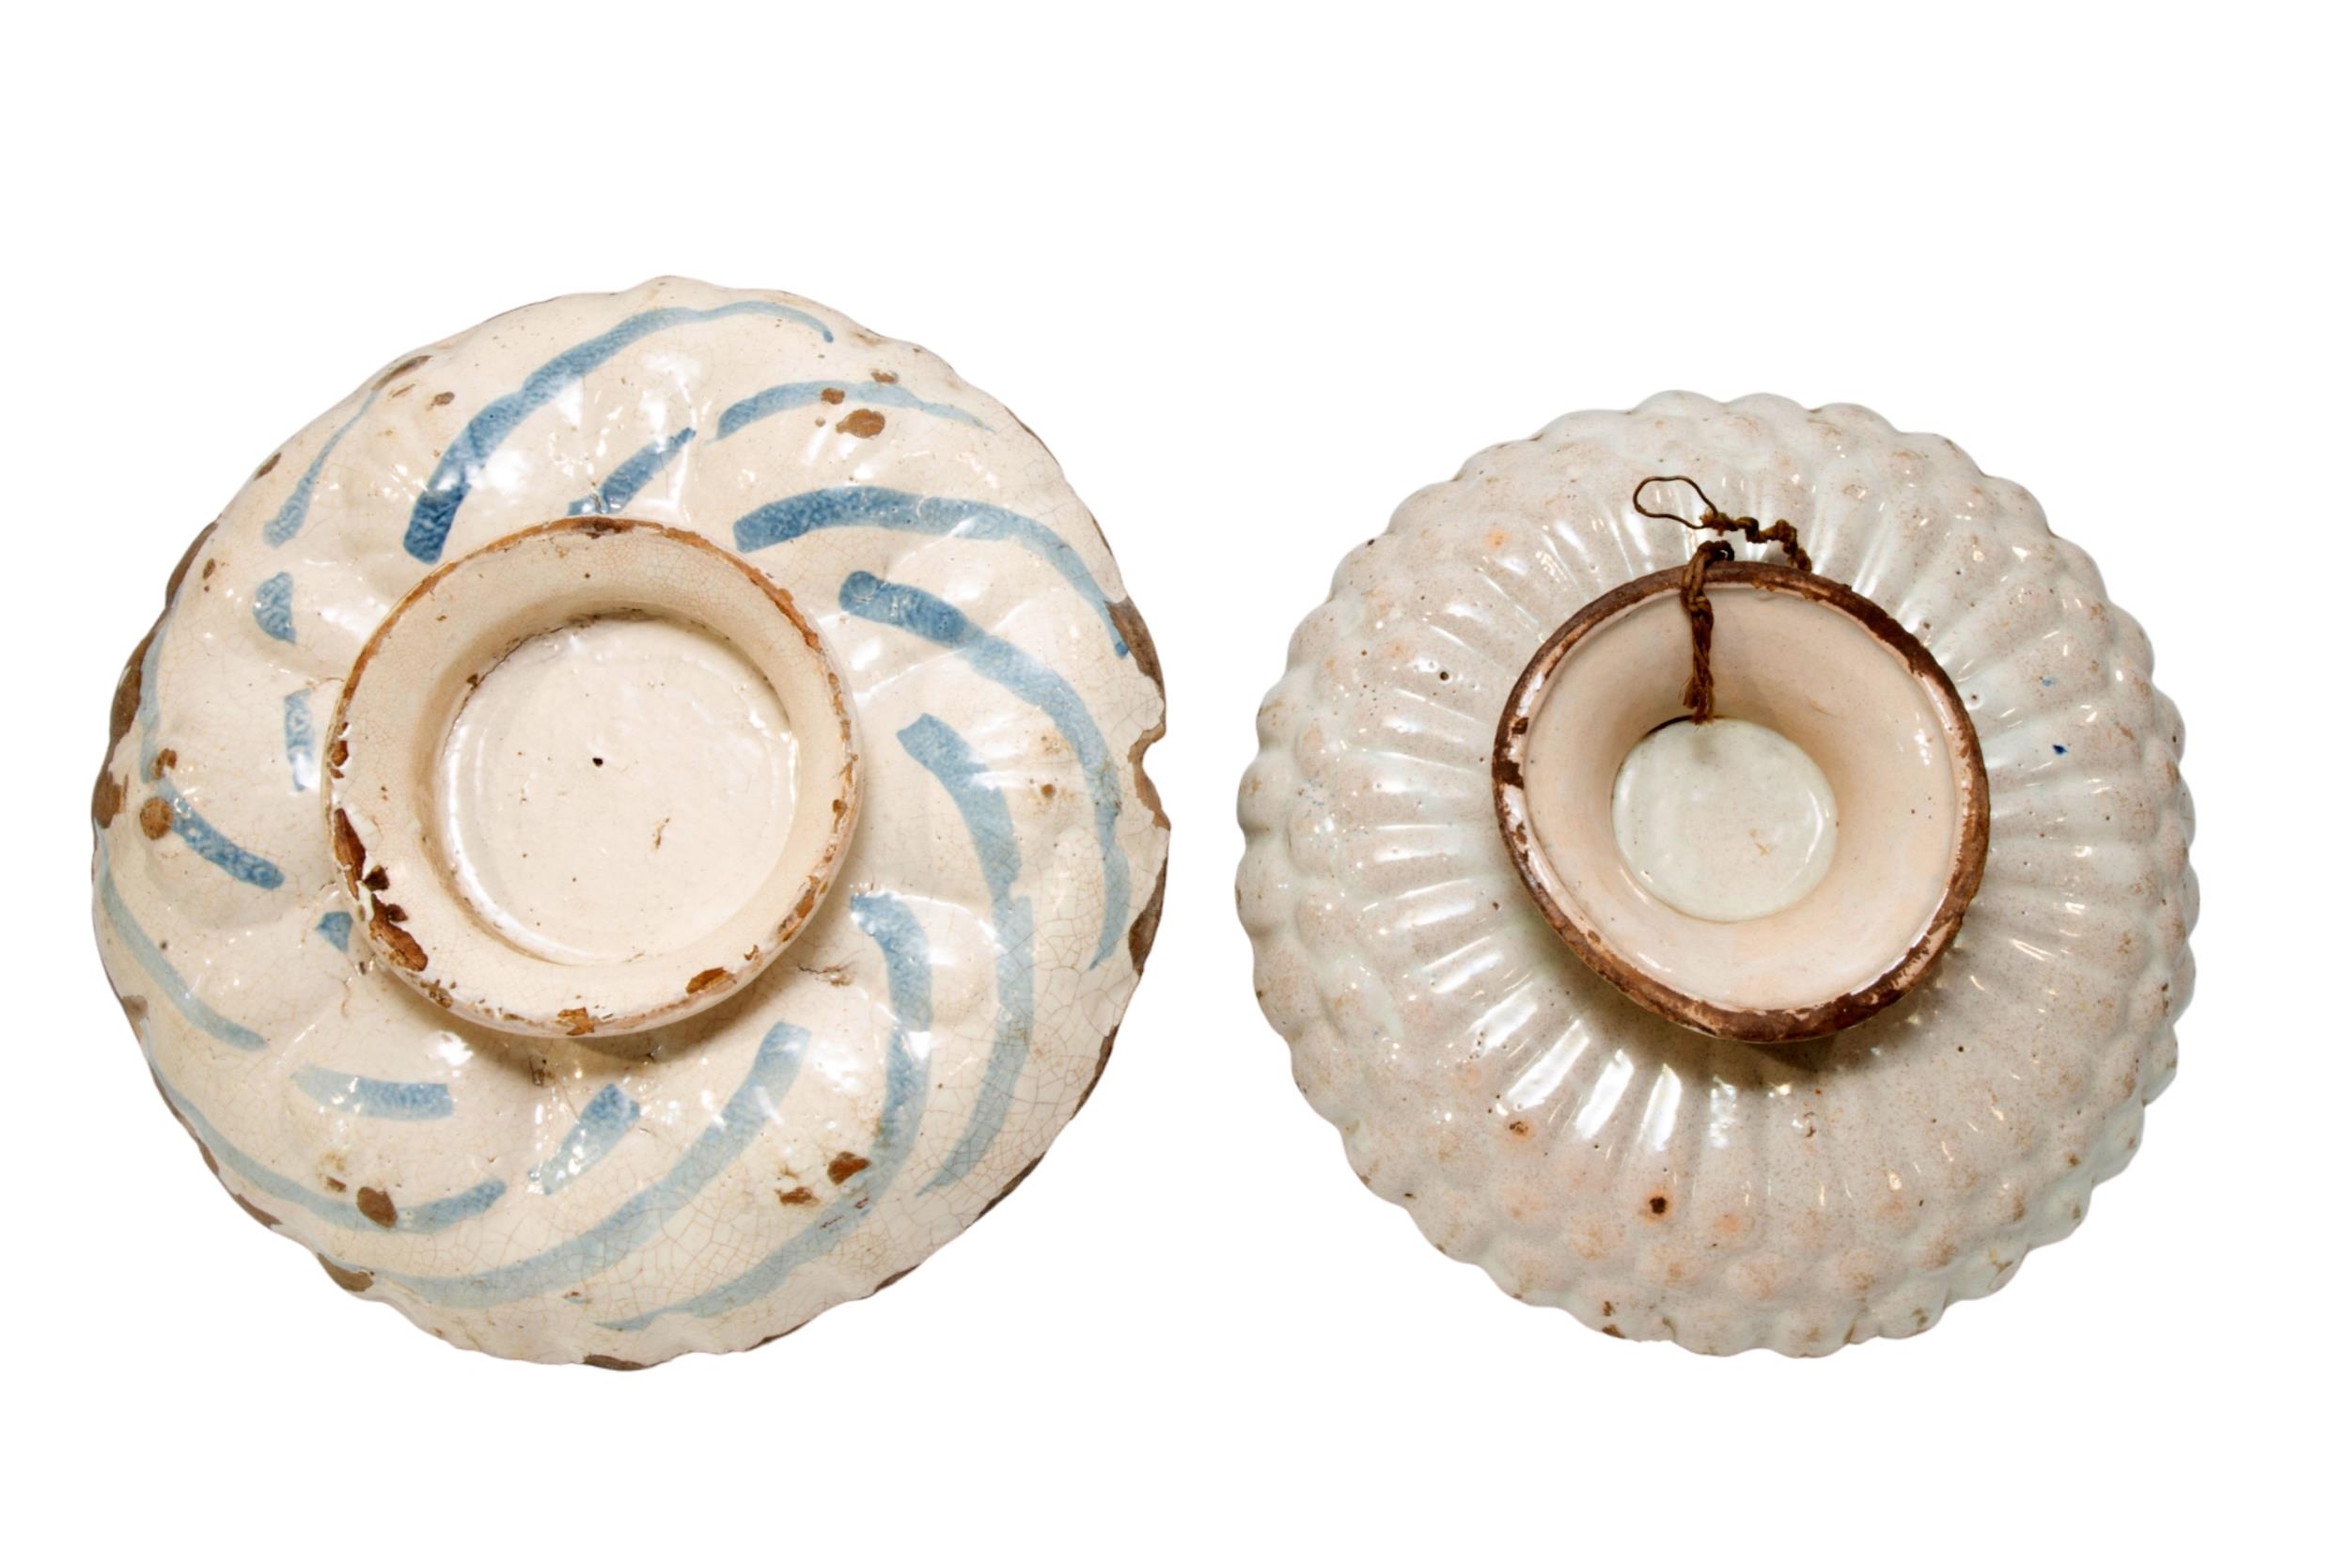 TWO ITALIAN FAIENCE DISHES, EARLY 18TH CENTURY, one of lobed form and painted with bird and fruit - Image 2 of 2